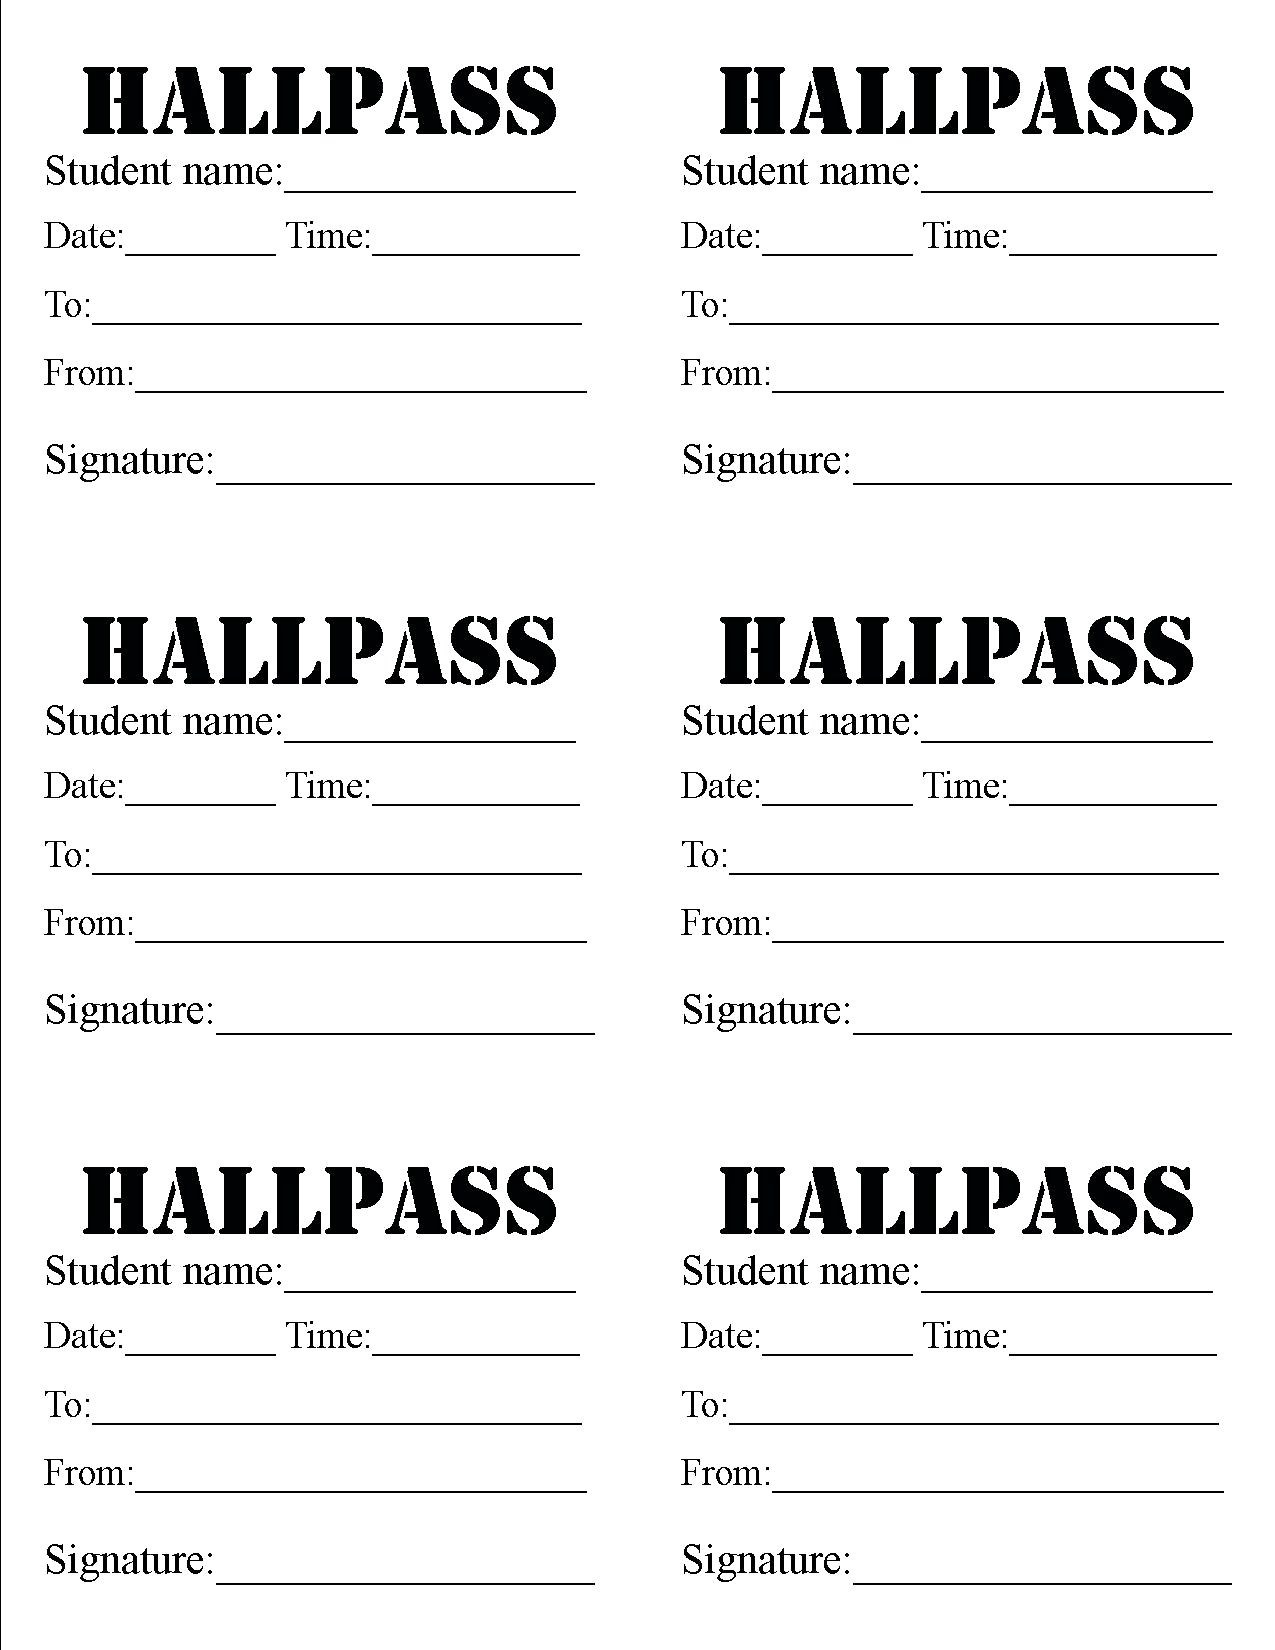 Hall Pass Template 10 Outrageous Ideas For Your Hall Pass - Free Printable Hall Pass Template